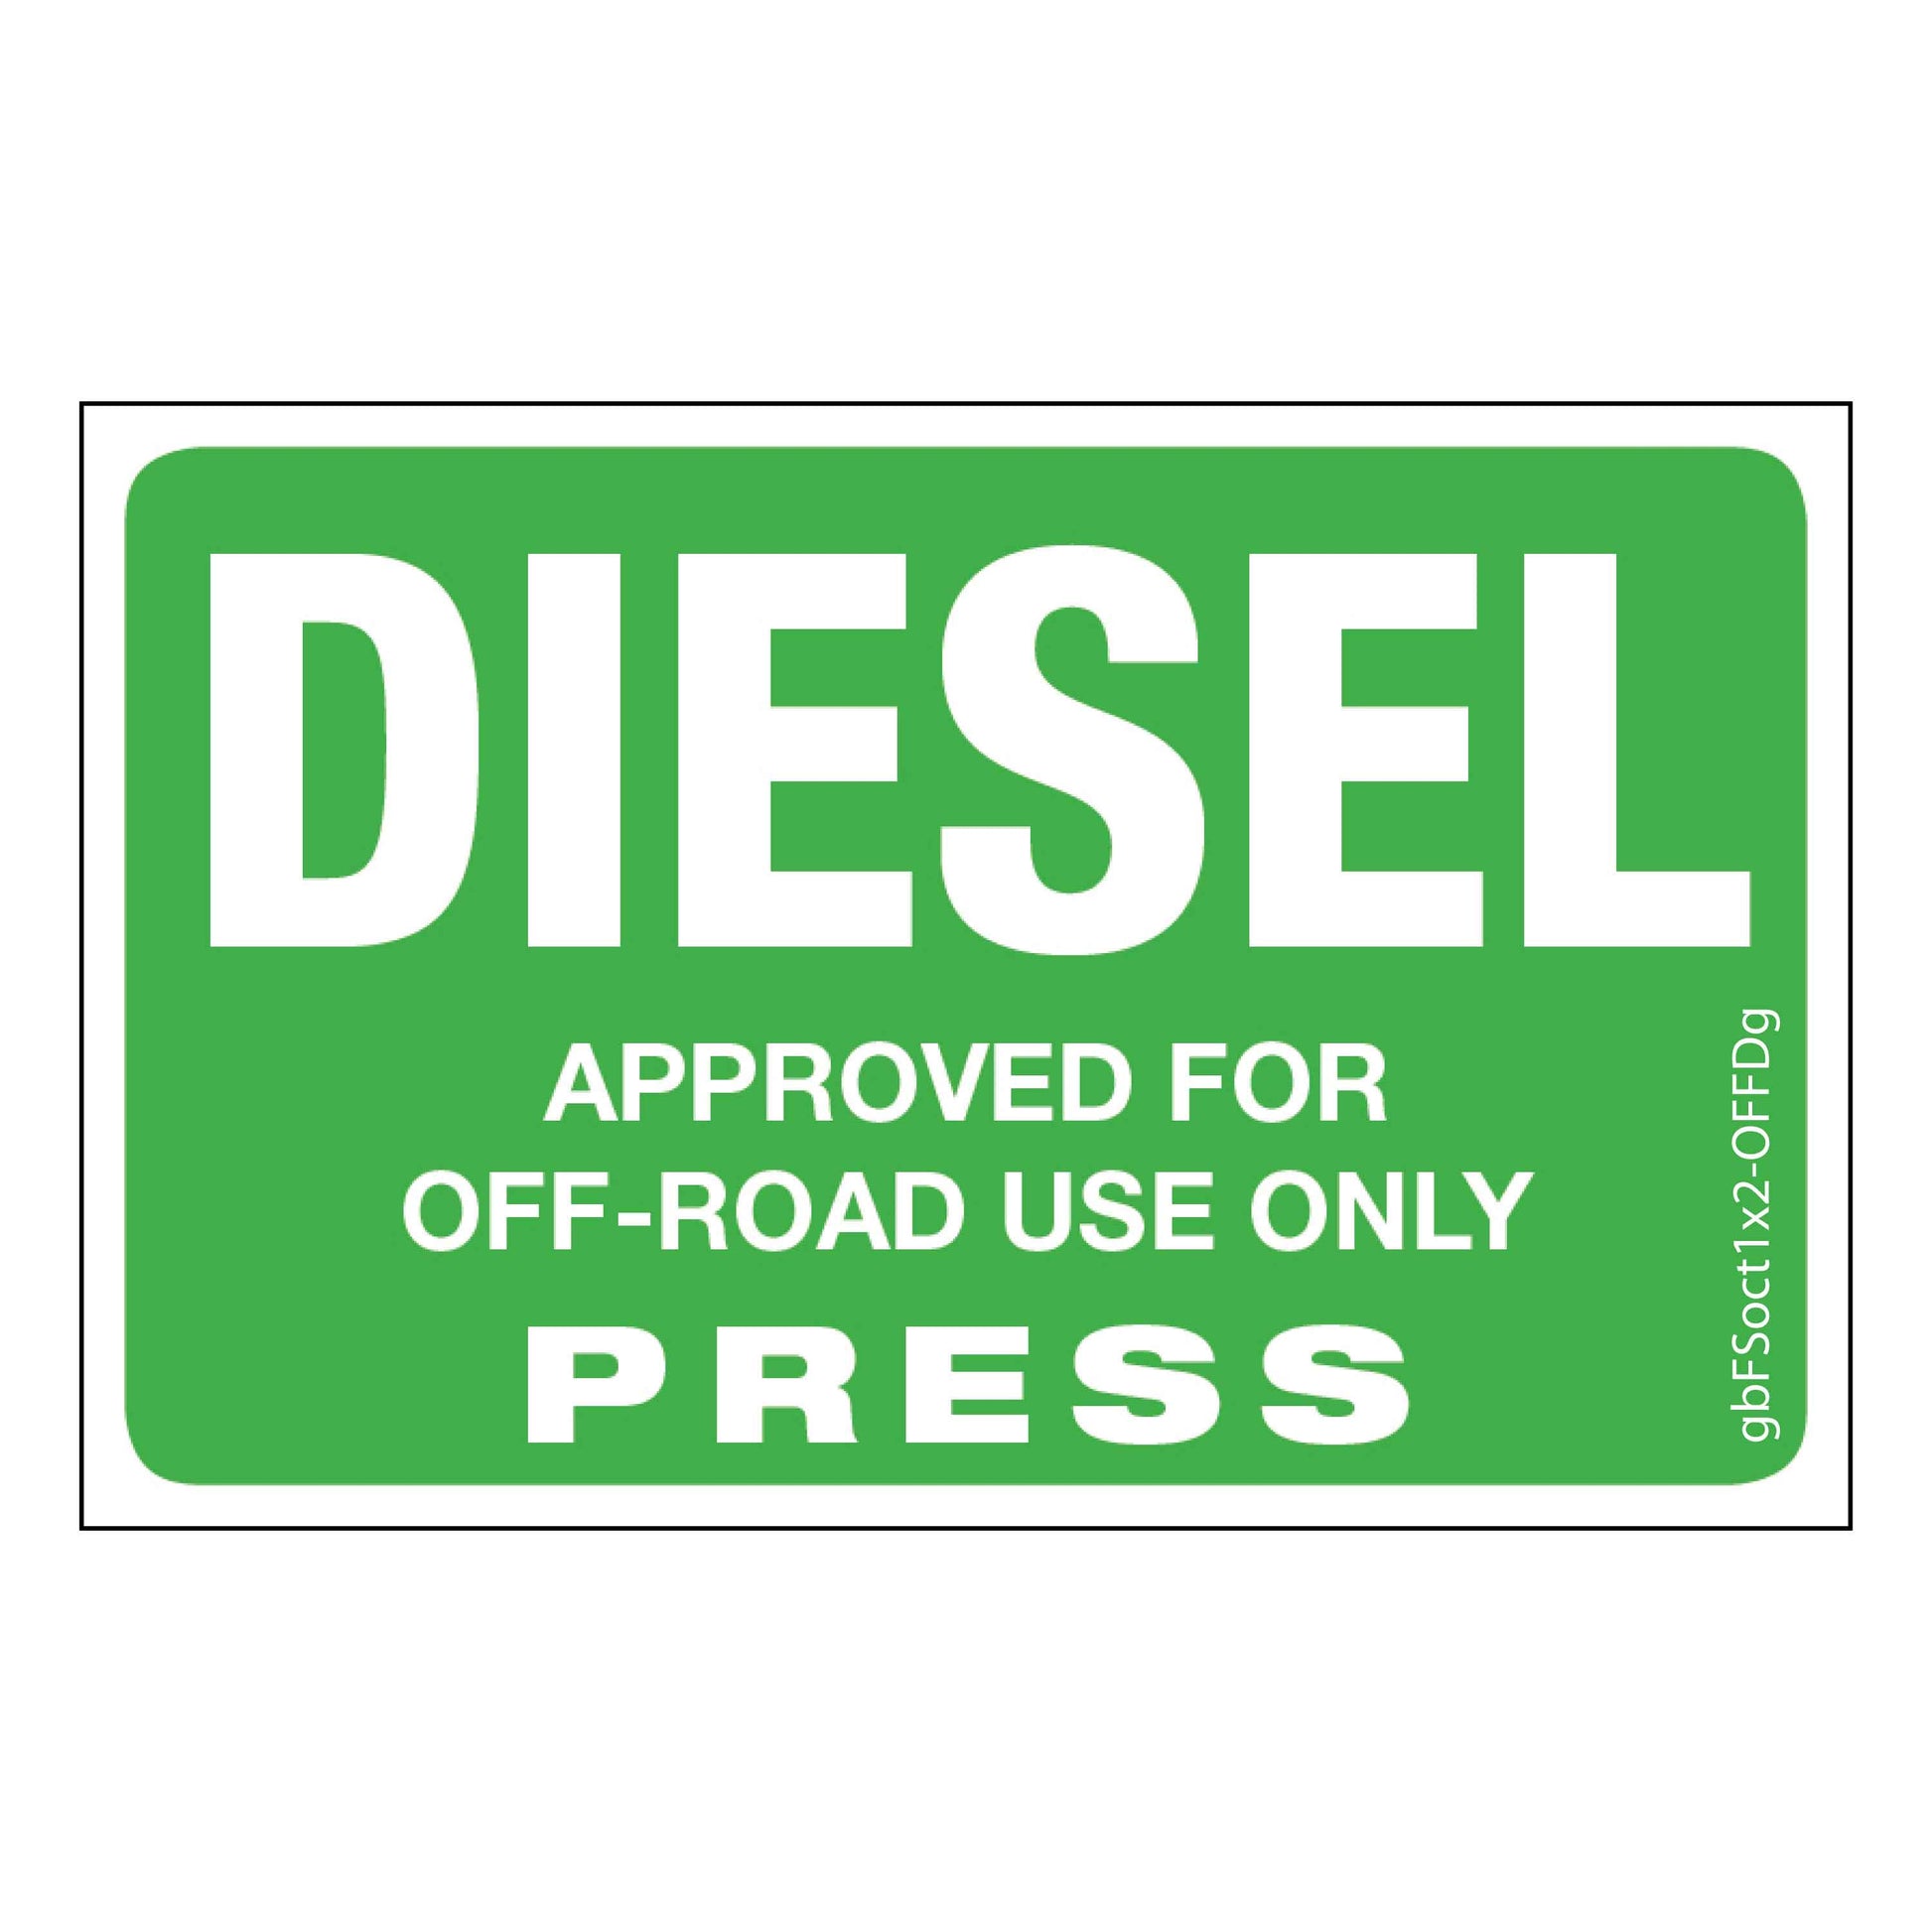 Diesel (Off Road) Press Octane Rating Decal, Green. 1 inch by 2 inches in size.